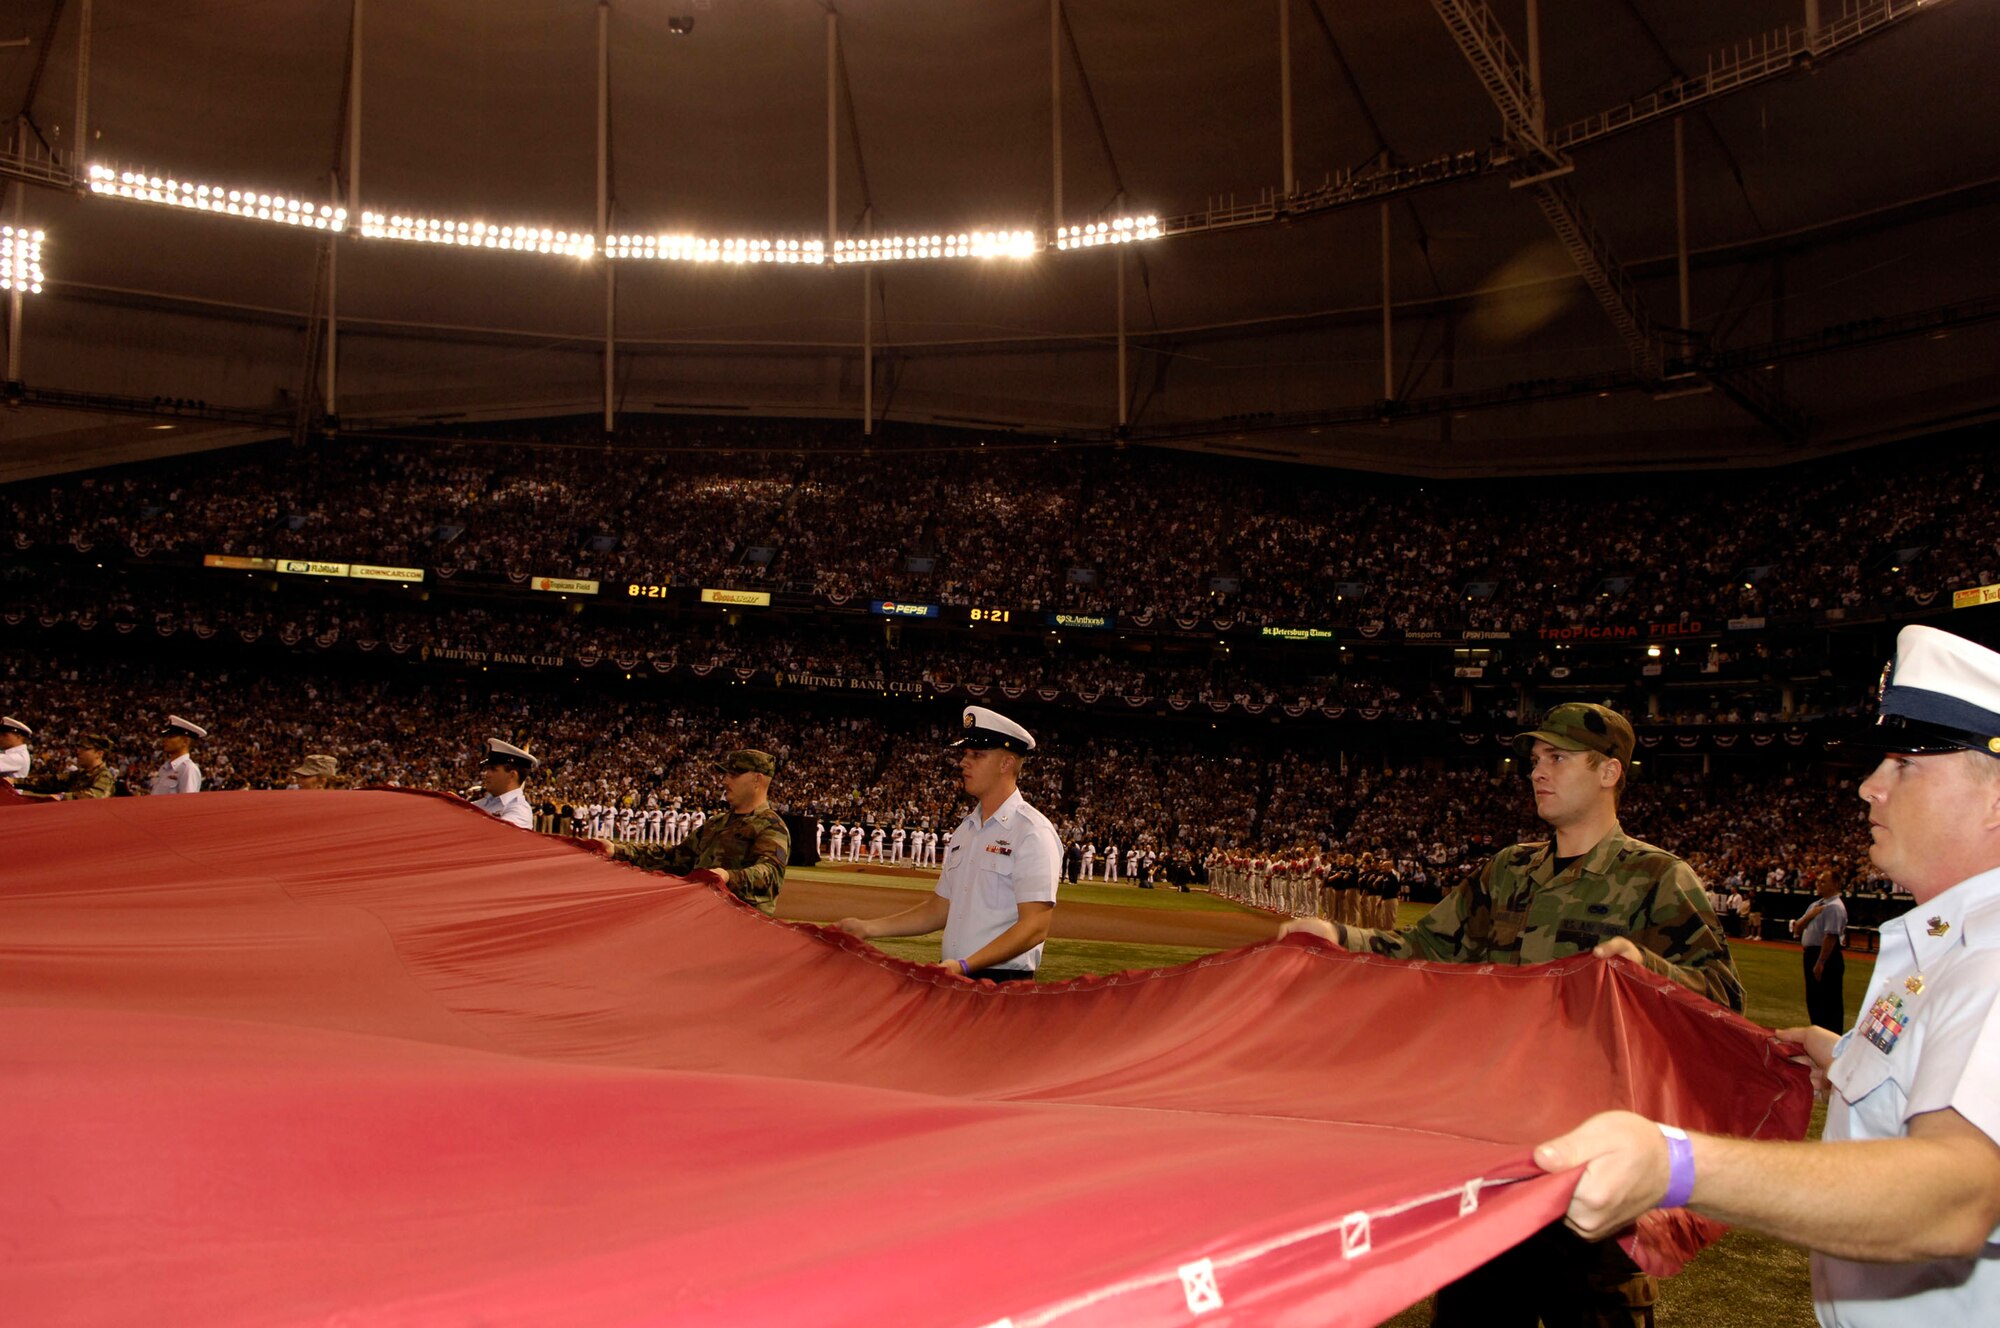 Members of the 6th Air Mobility Wing along with members of the U.S. Coast Guard assigned to sector St. Petersburg, Fla., hold the American Flag during the playing of the National Anthem in the first game of the World Series Oct. 22, where the Philadelphia Phillies took on the Tampa Bay Rays. (U.S. Air Force Photo by Senior Airman Stephenie Wade)